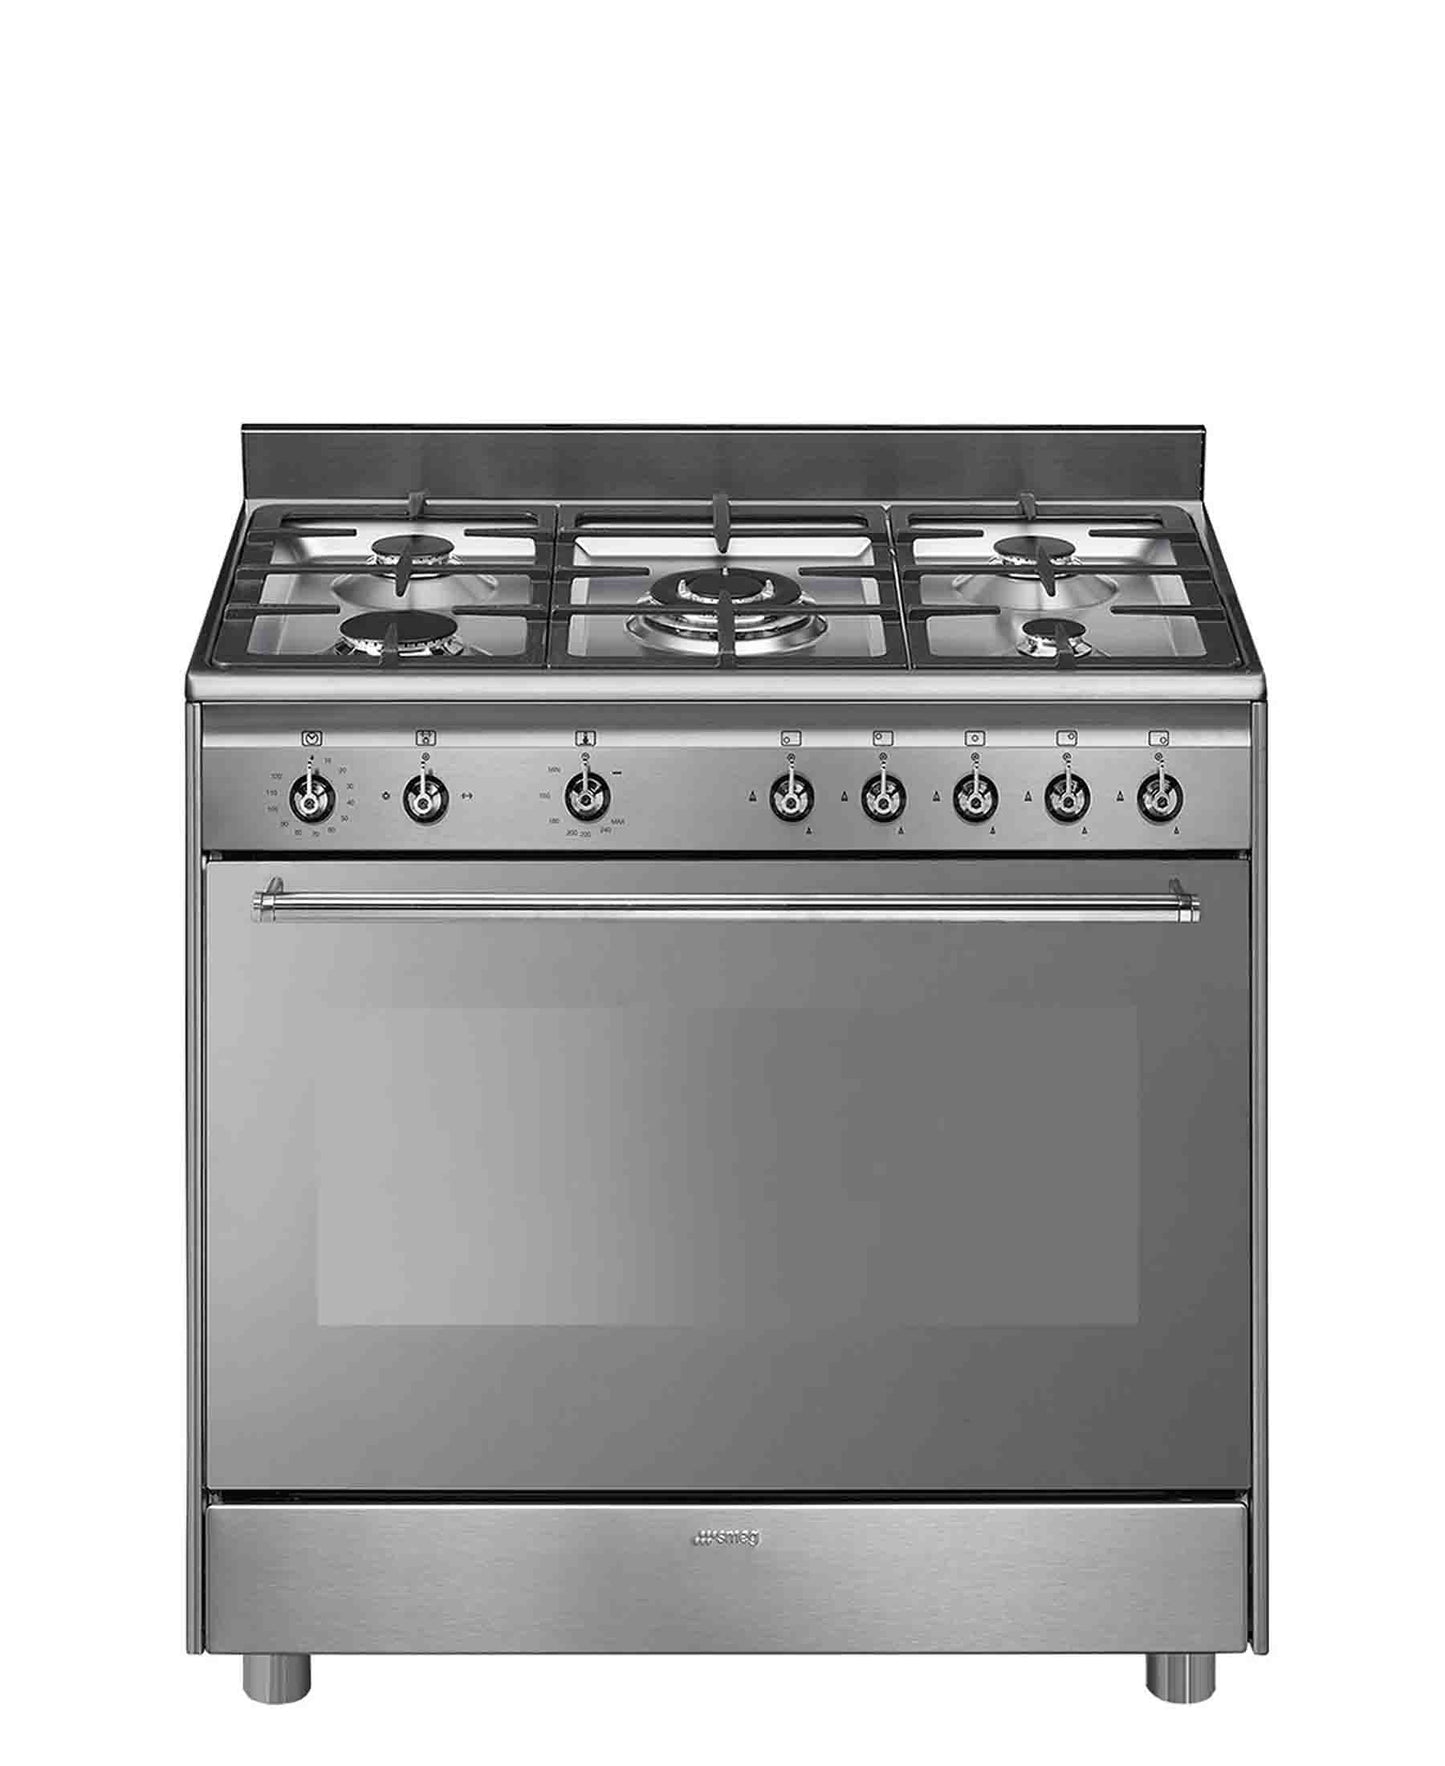 Smeg 90cm Stainless Steel Gas Stove - Silver